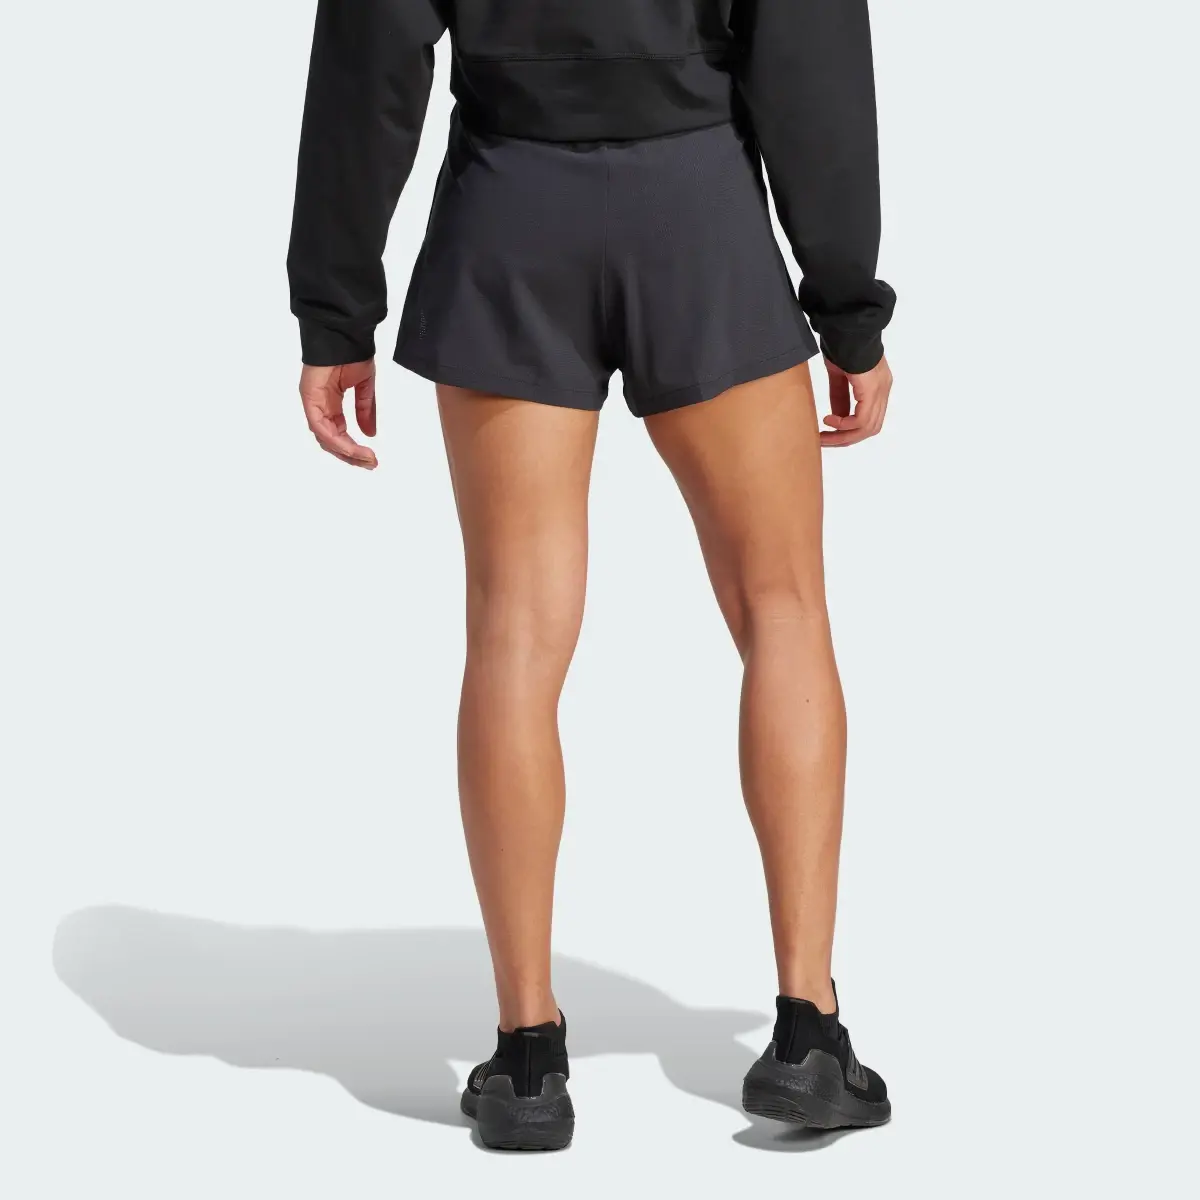 Adidas HIIT HEAT.RDY Two-in-One Shorts. 3